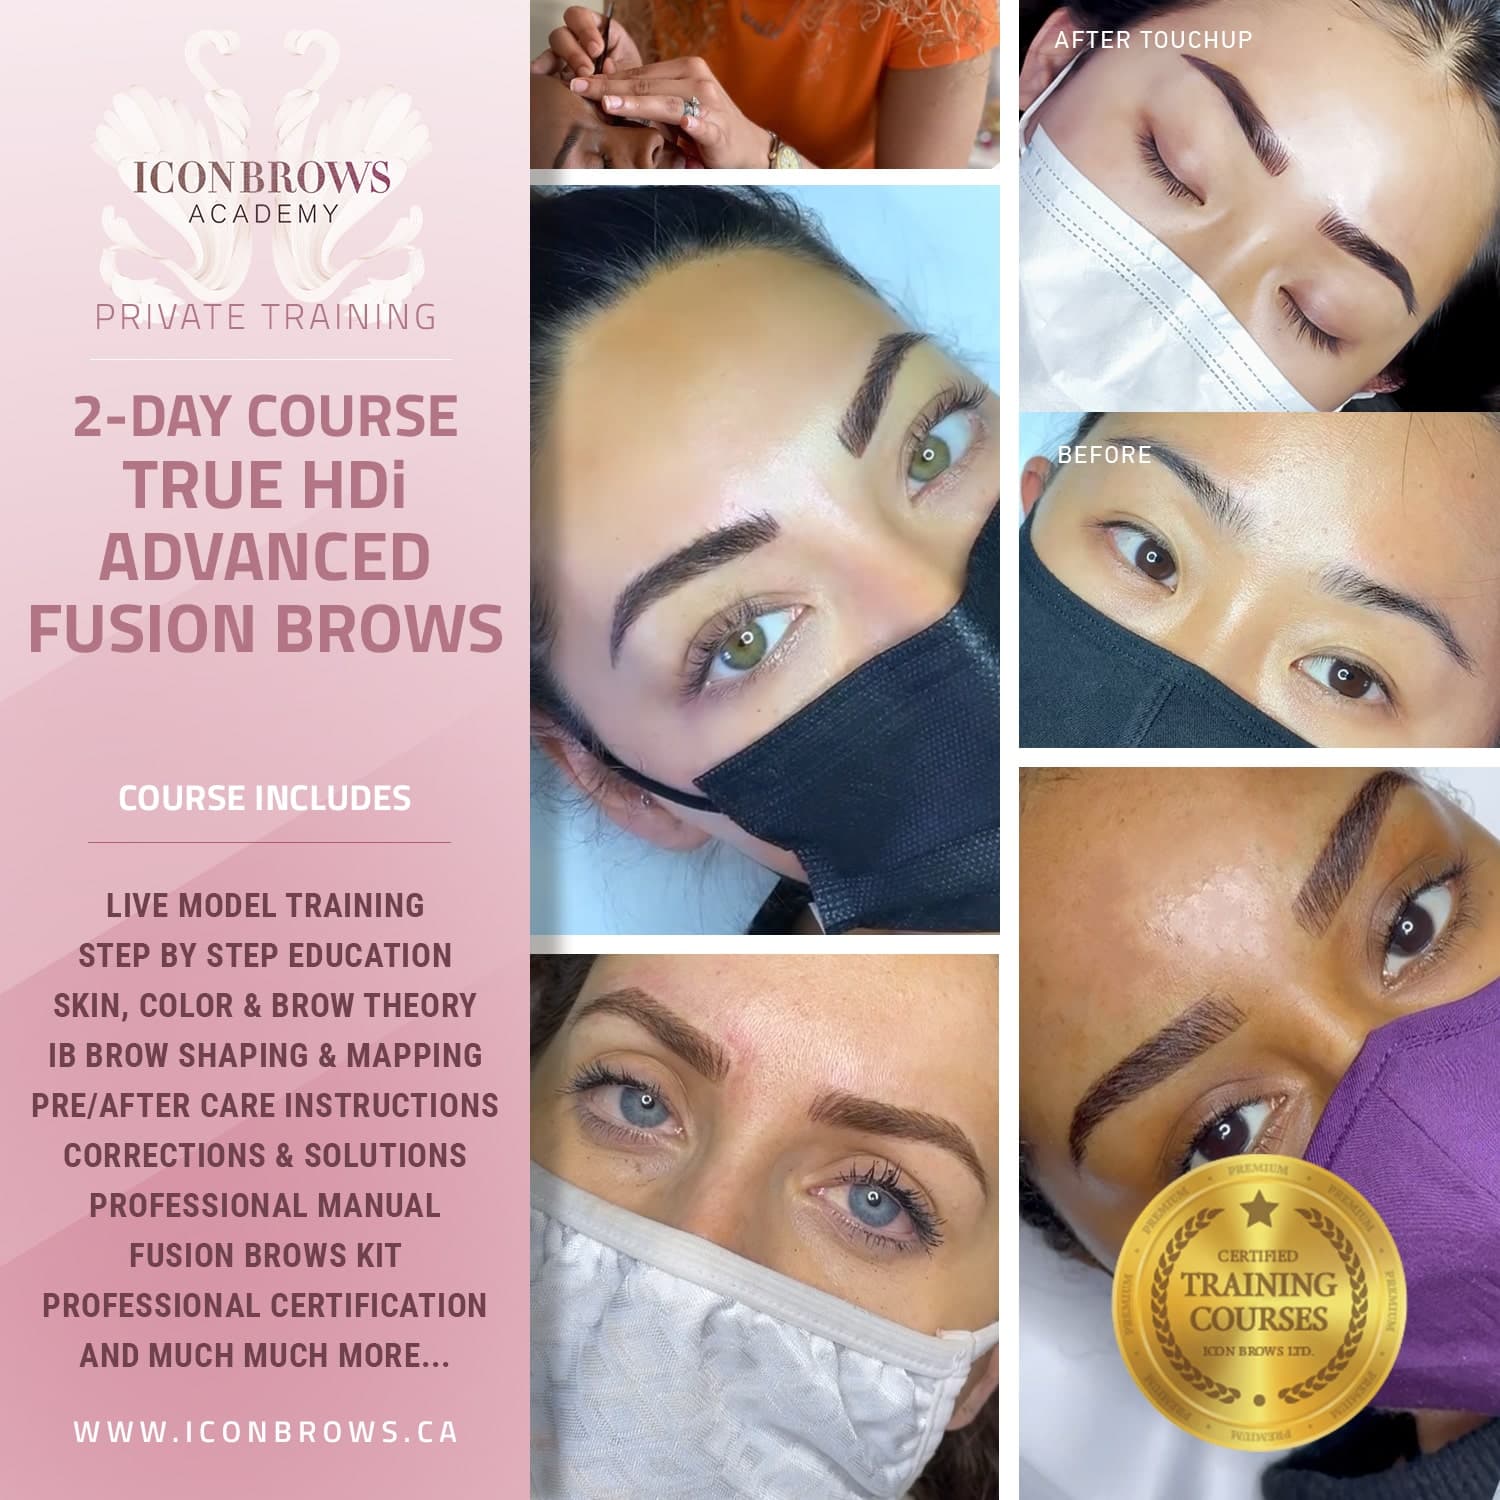 Fusion Brows Training Course with Iconbrows Academy Toronto's Top Brow & Lash Training Courses